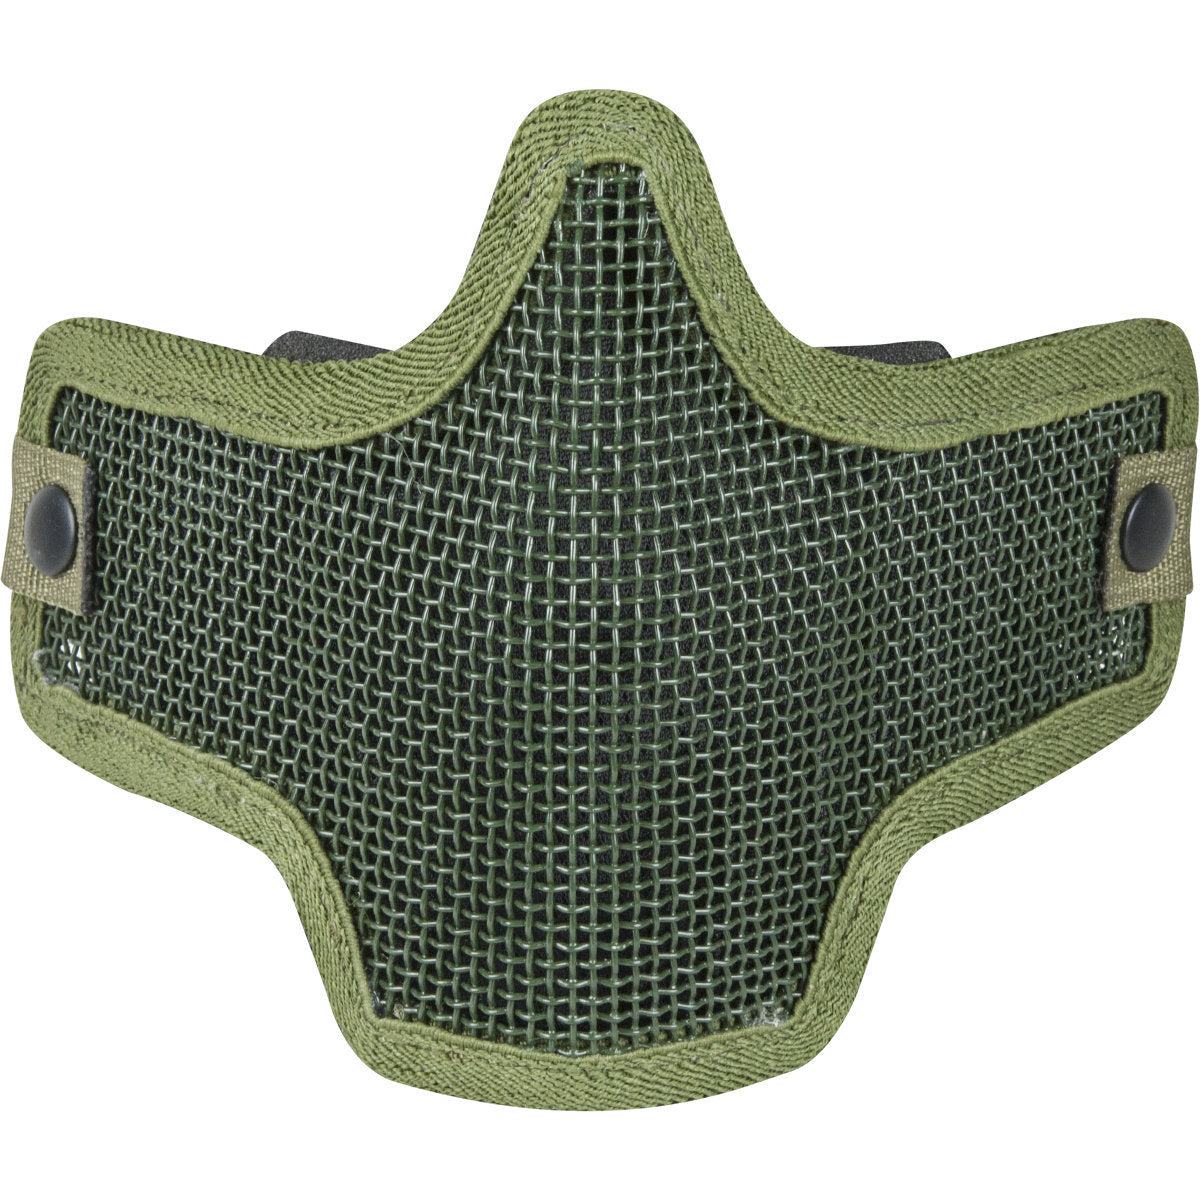 Valken Kilo Airsoft Mesh Mask - Eminent Paintball And Airsoft